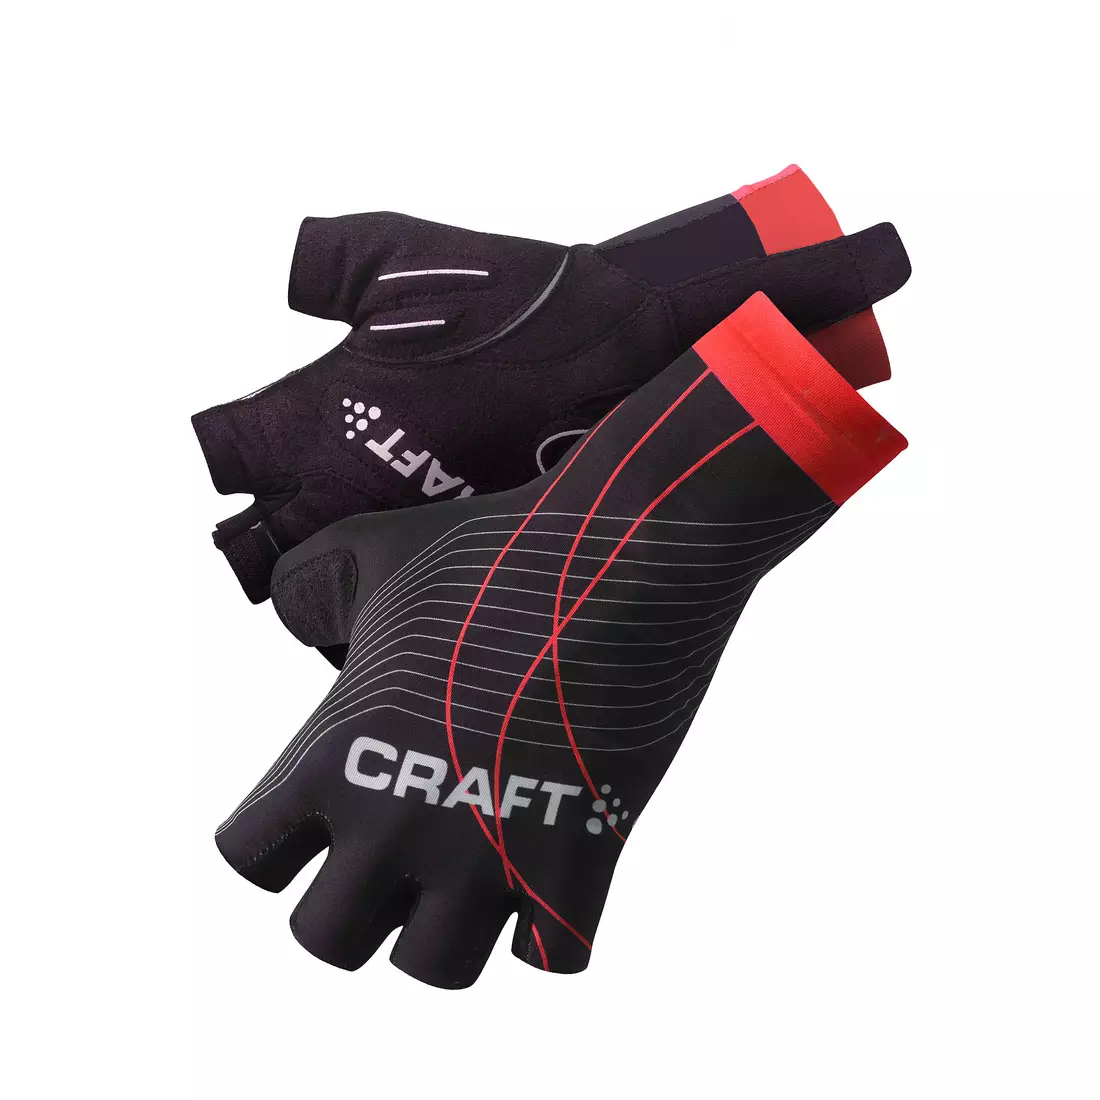 CRAFT ELITE cycling gloves 1901290-9430